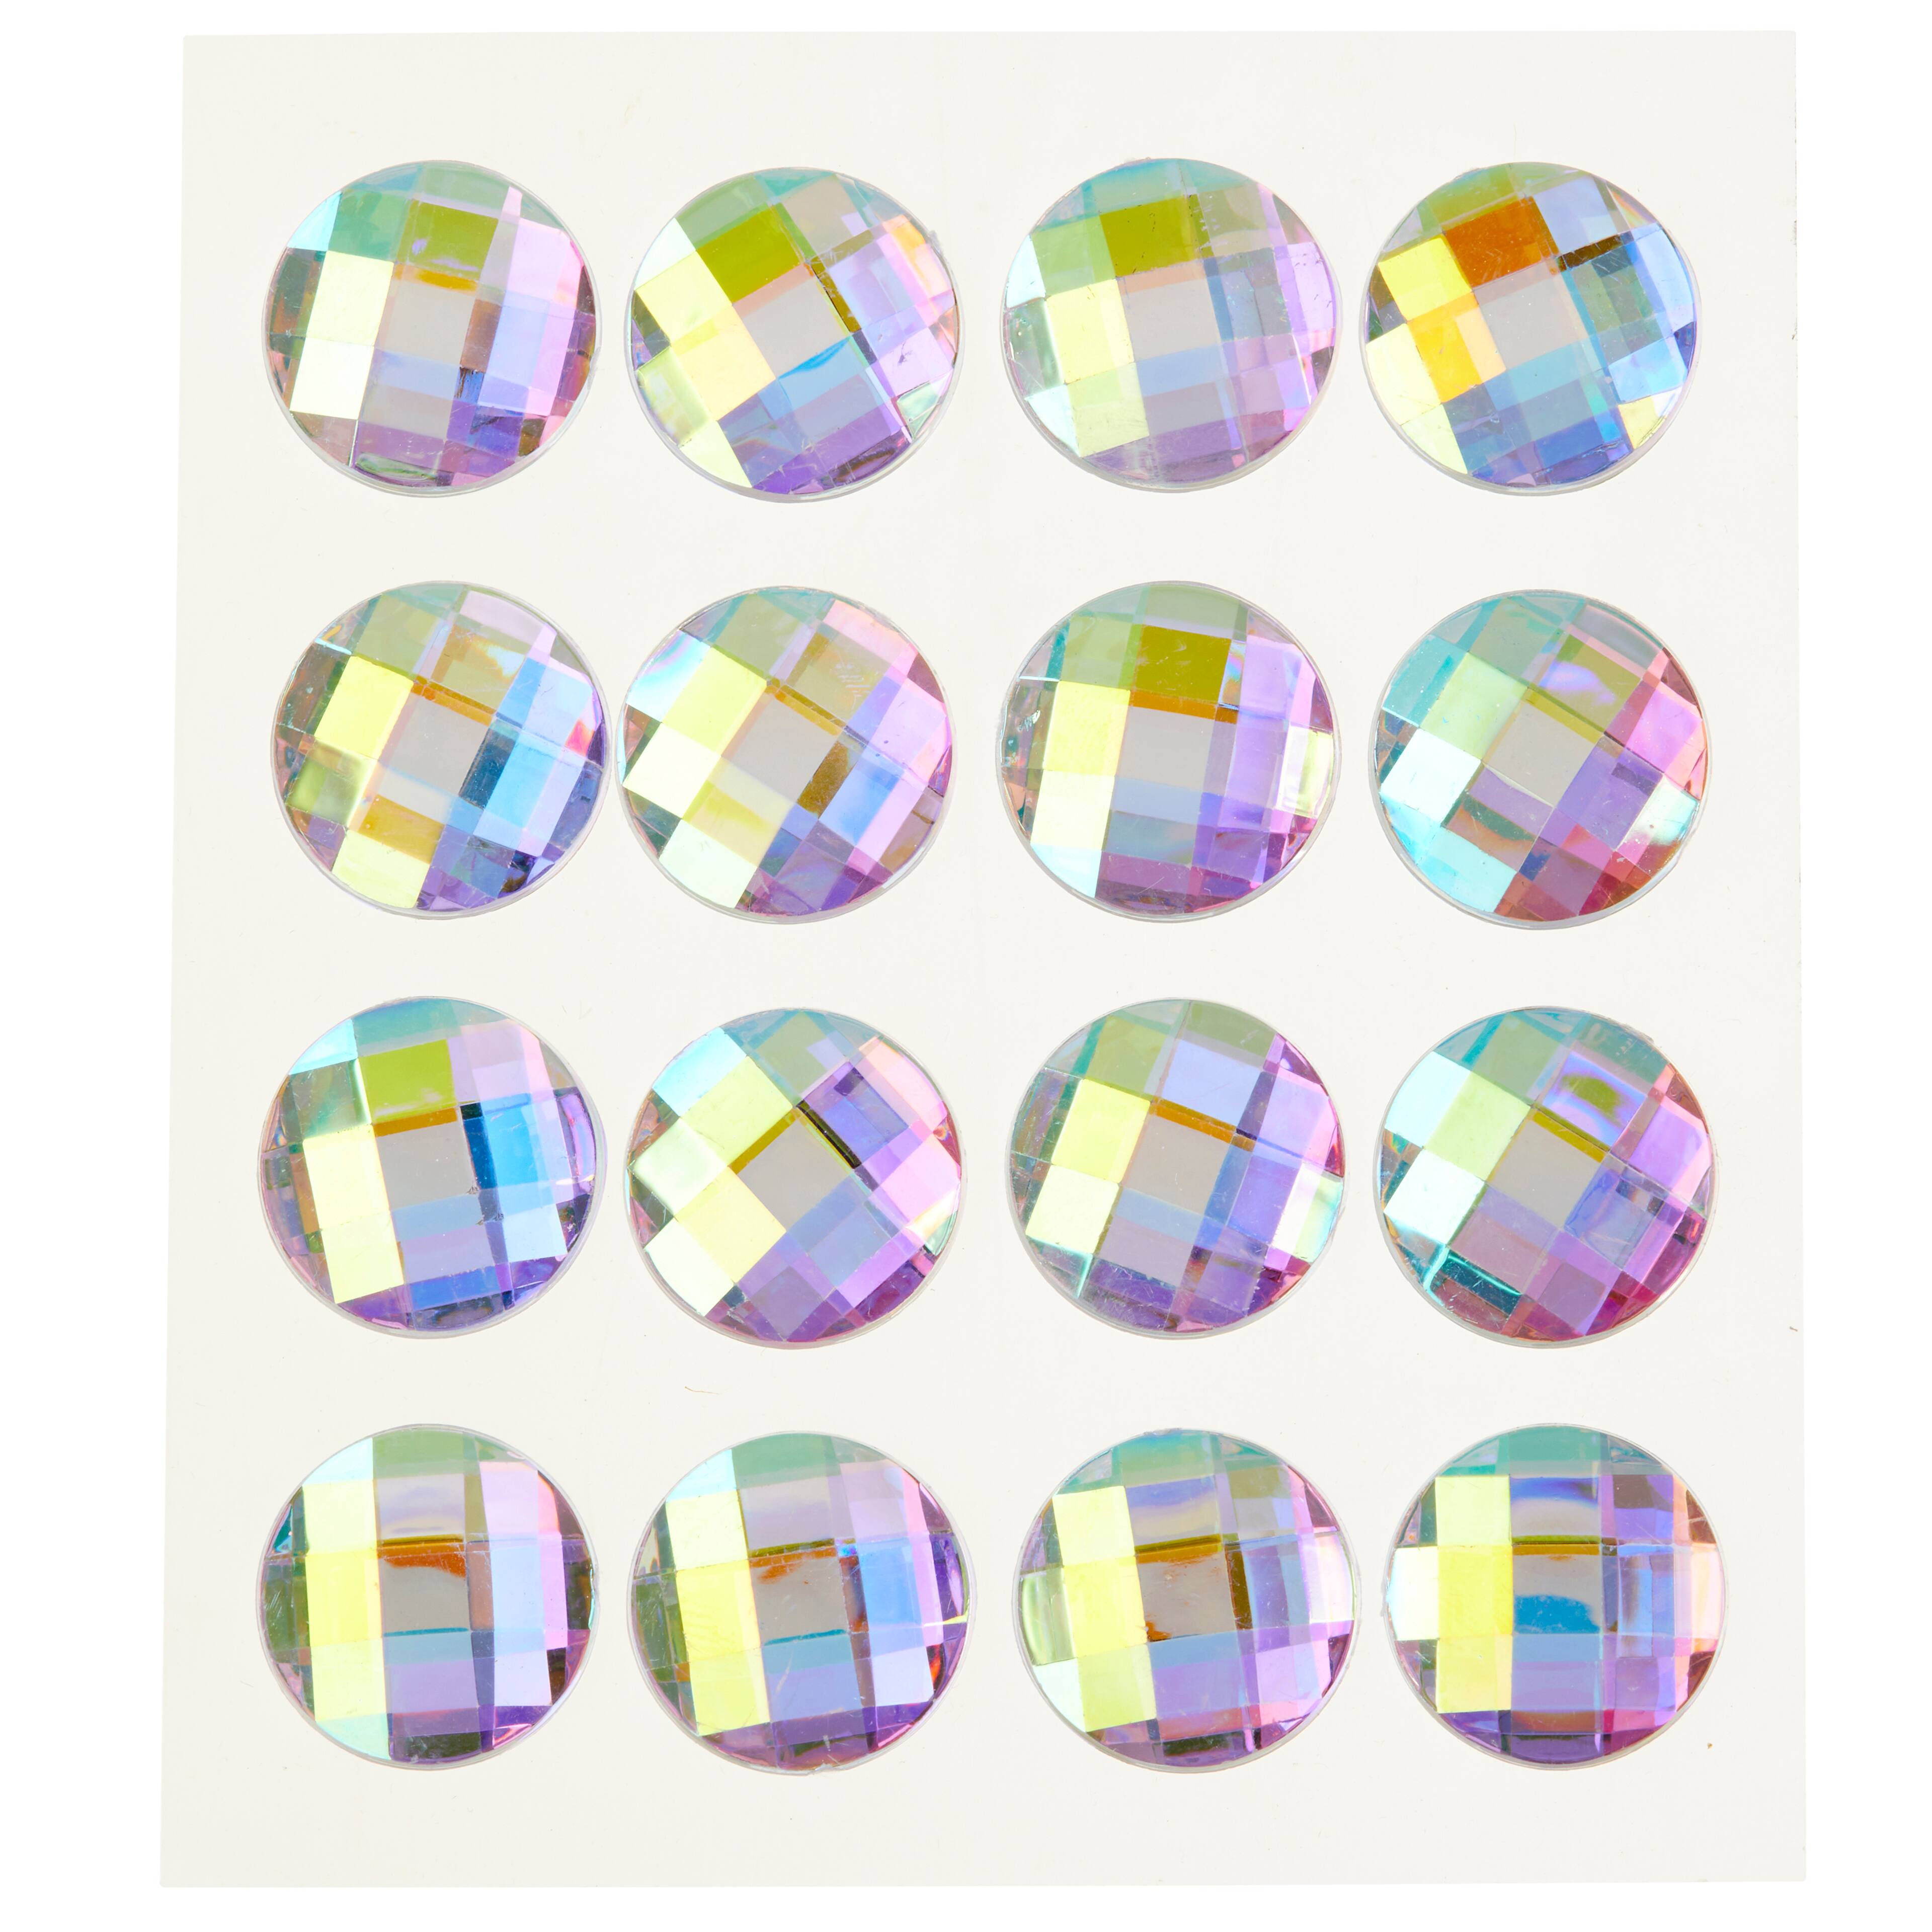 12 Packs: 16 ct. (192 total) Iridescent Rhinestone Stickers by Recollections&#x2122;